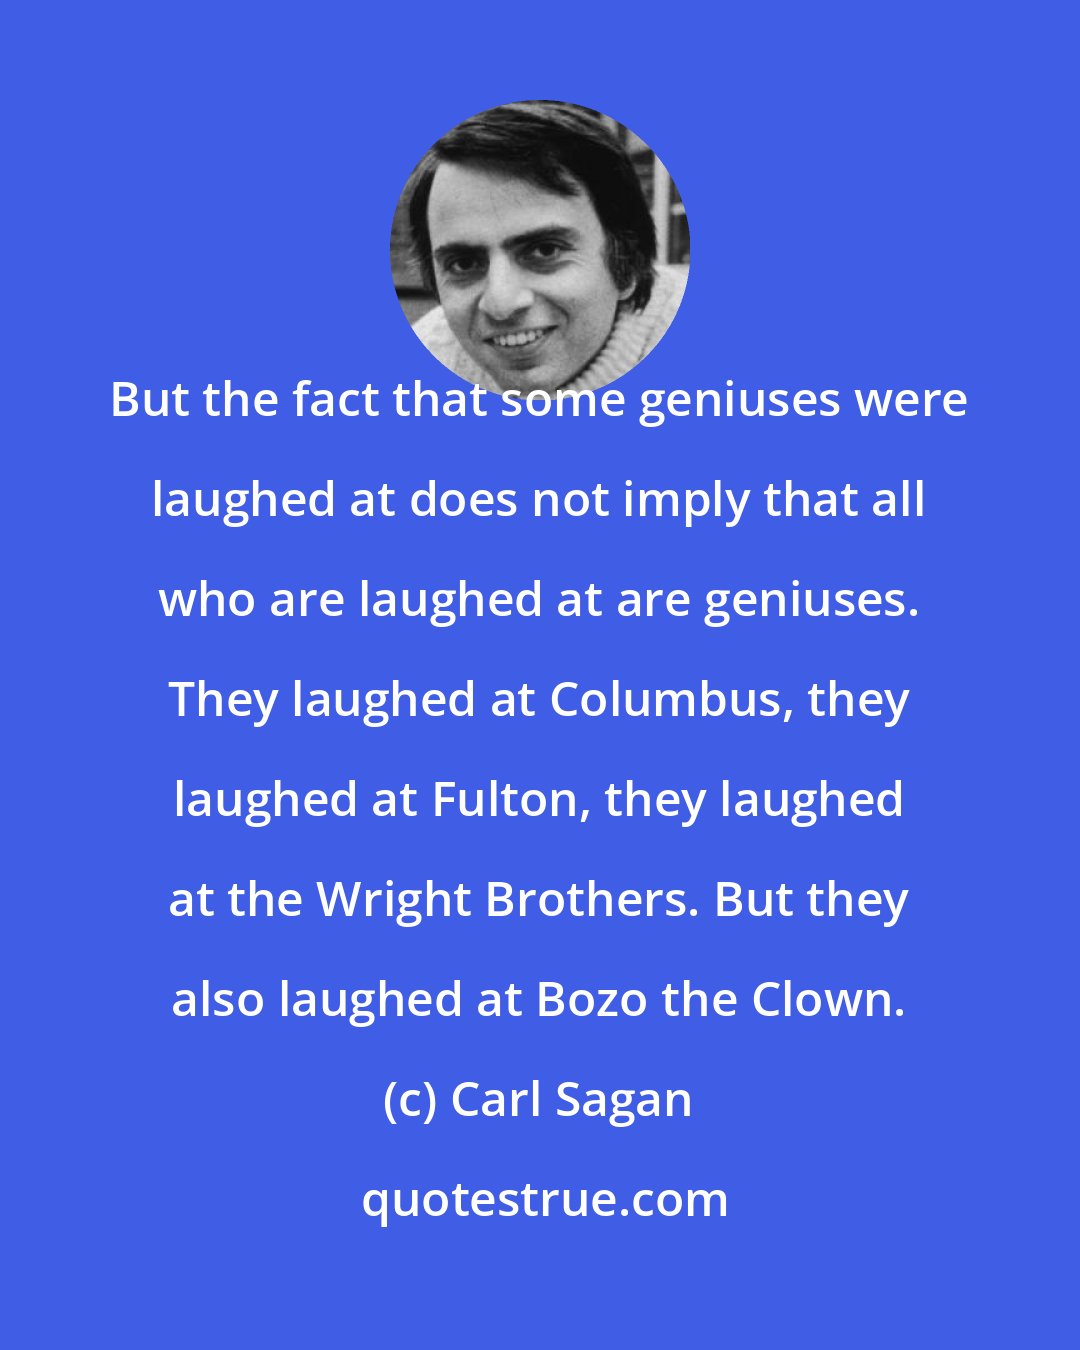 Carl Sagan: But the fact that some geniuses were laughed at does not imply that all who are laughed at are geniuses. They laughed at Columbus, they laughed at Fulton, they laughed at the Wright Brothers. But they also laughed at Bozo the Clown.